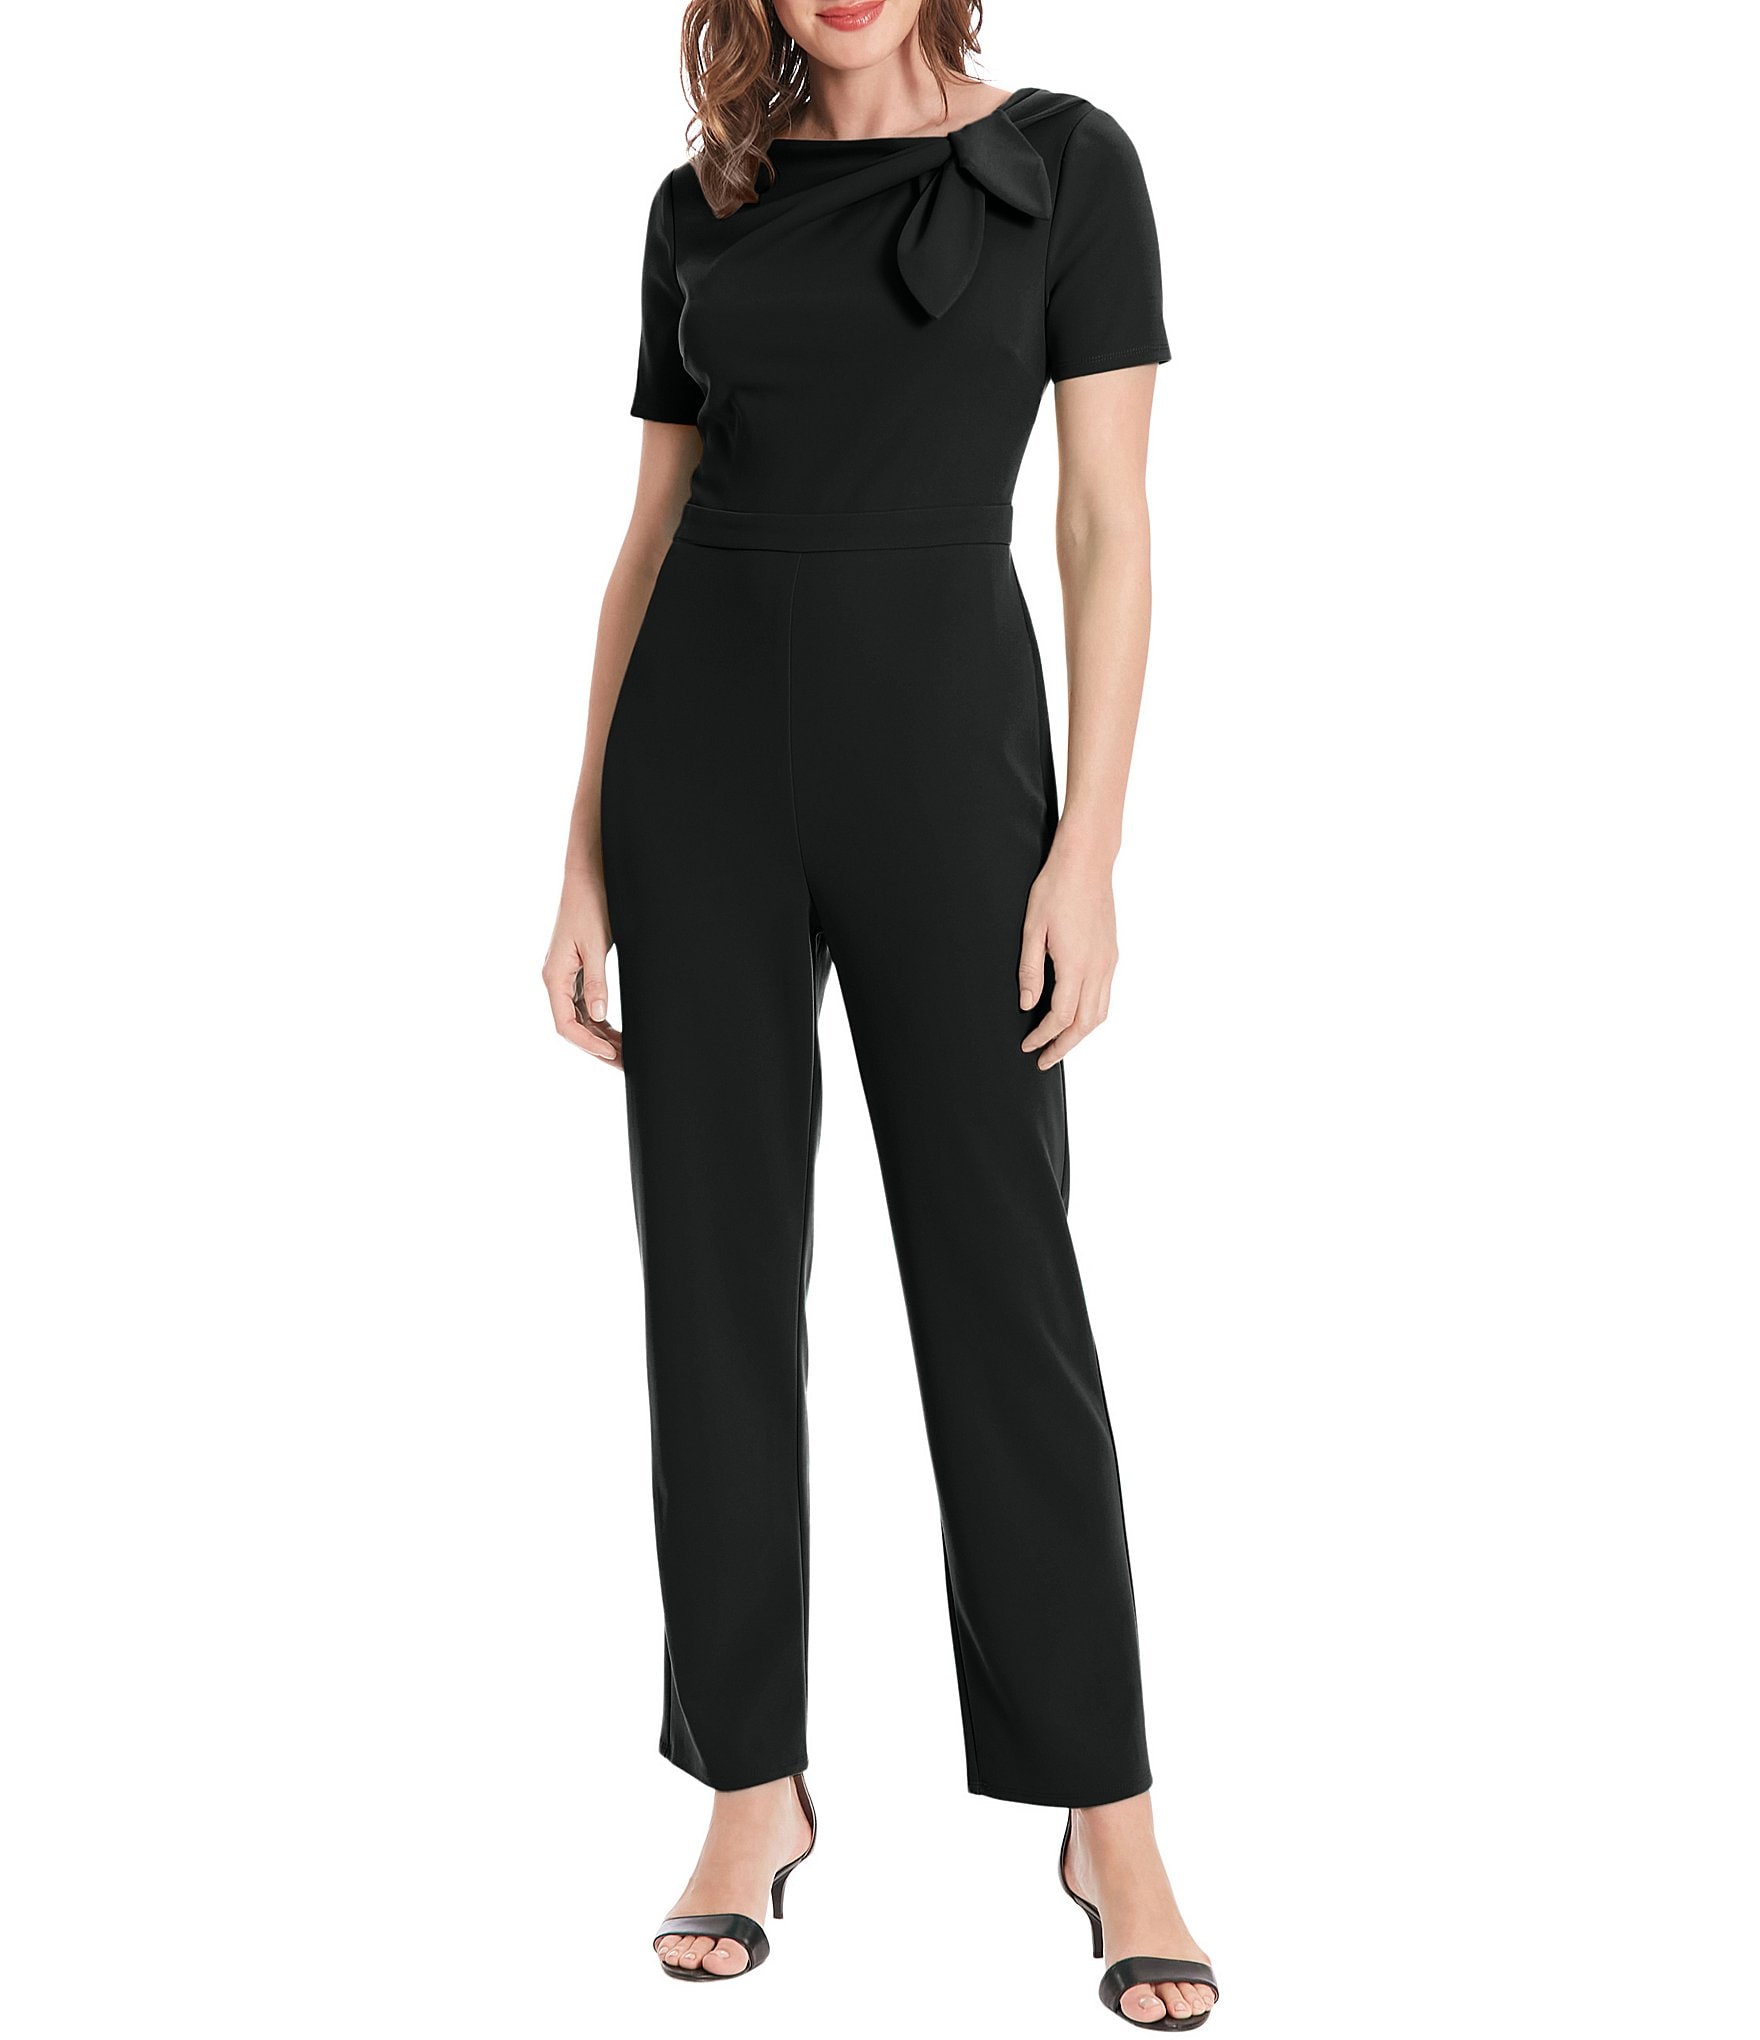 Amorino Sweetheart Neckline Backless Jumpsuit in Black | Oh Polly